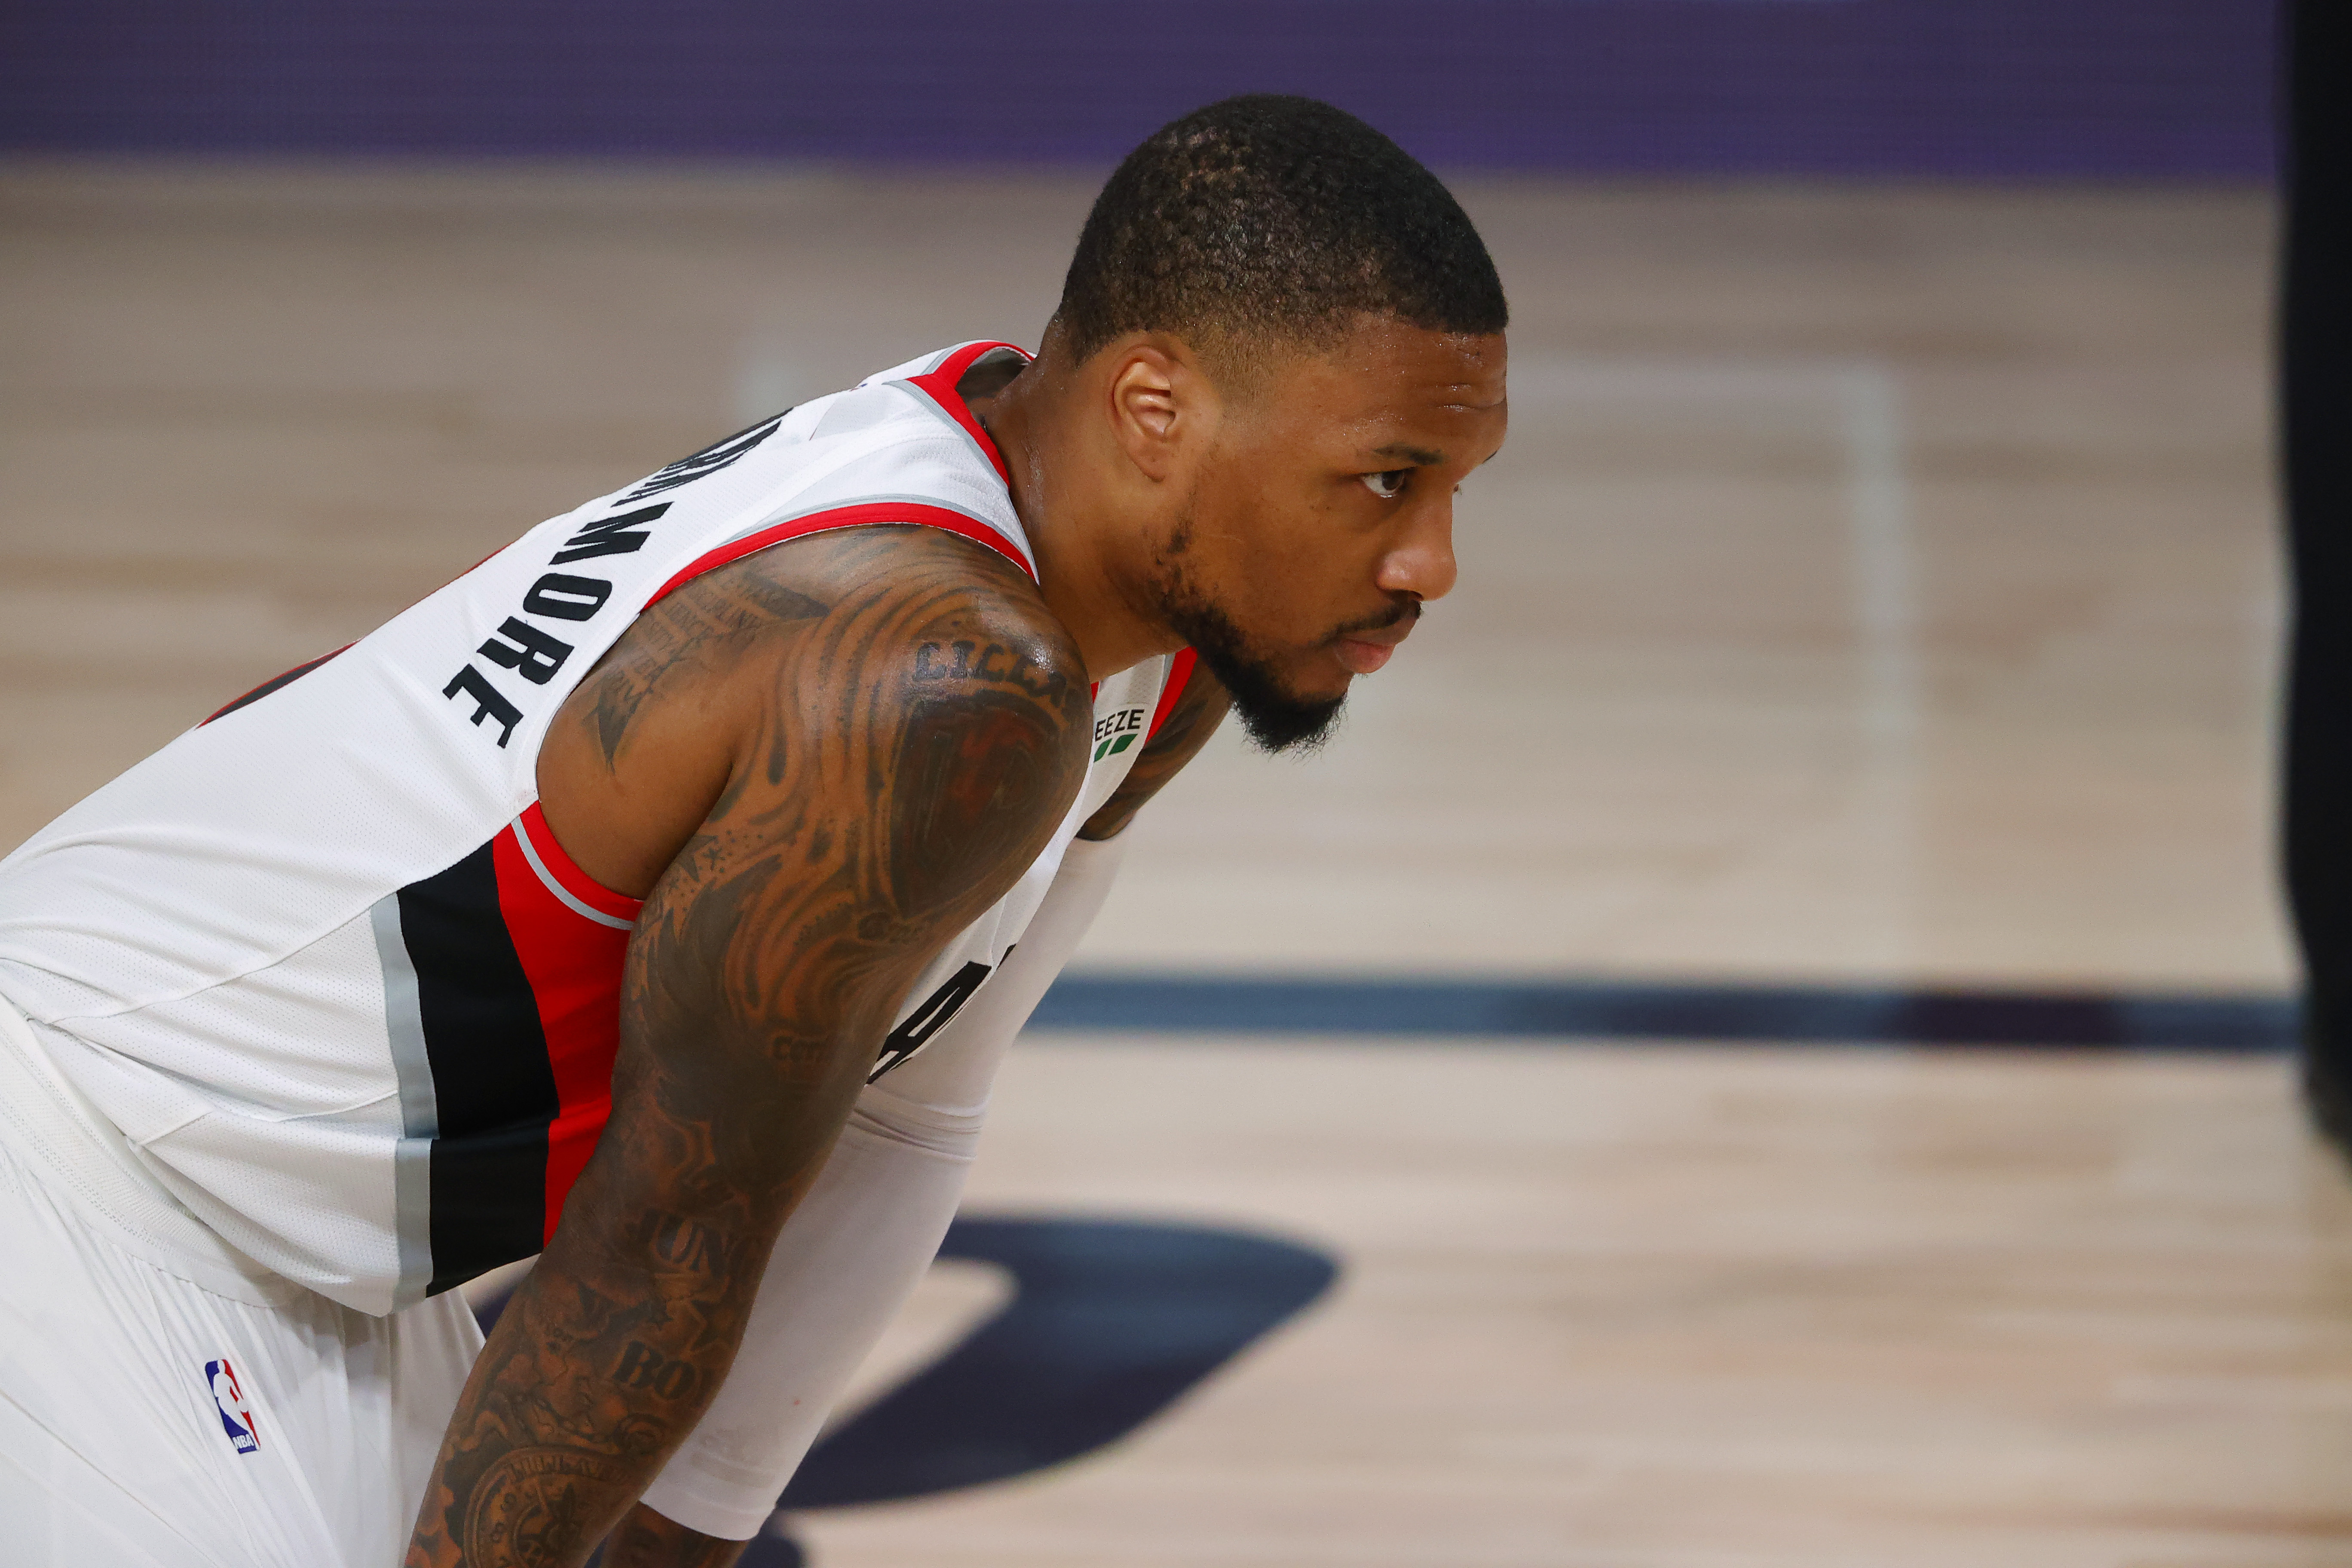 Daily Nba Bubble Primer The Damian Lillard Experience Rages On